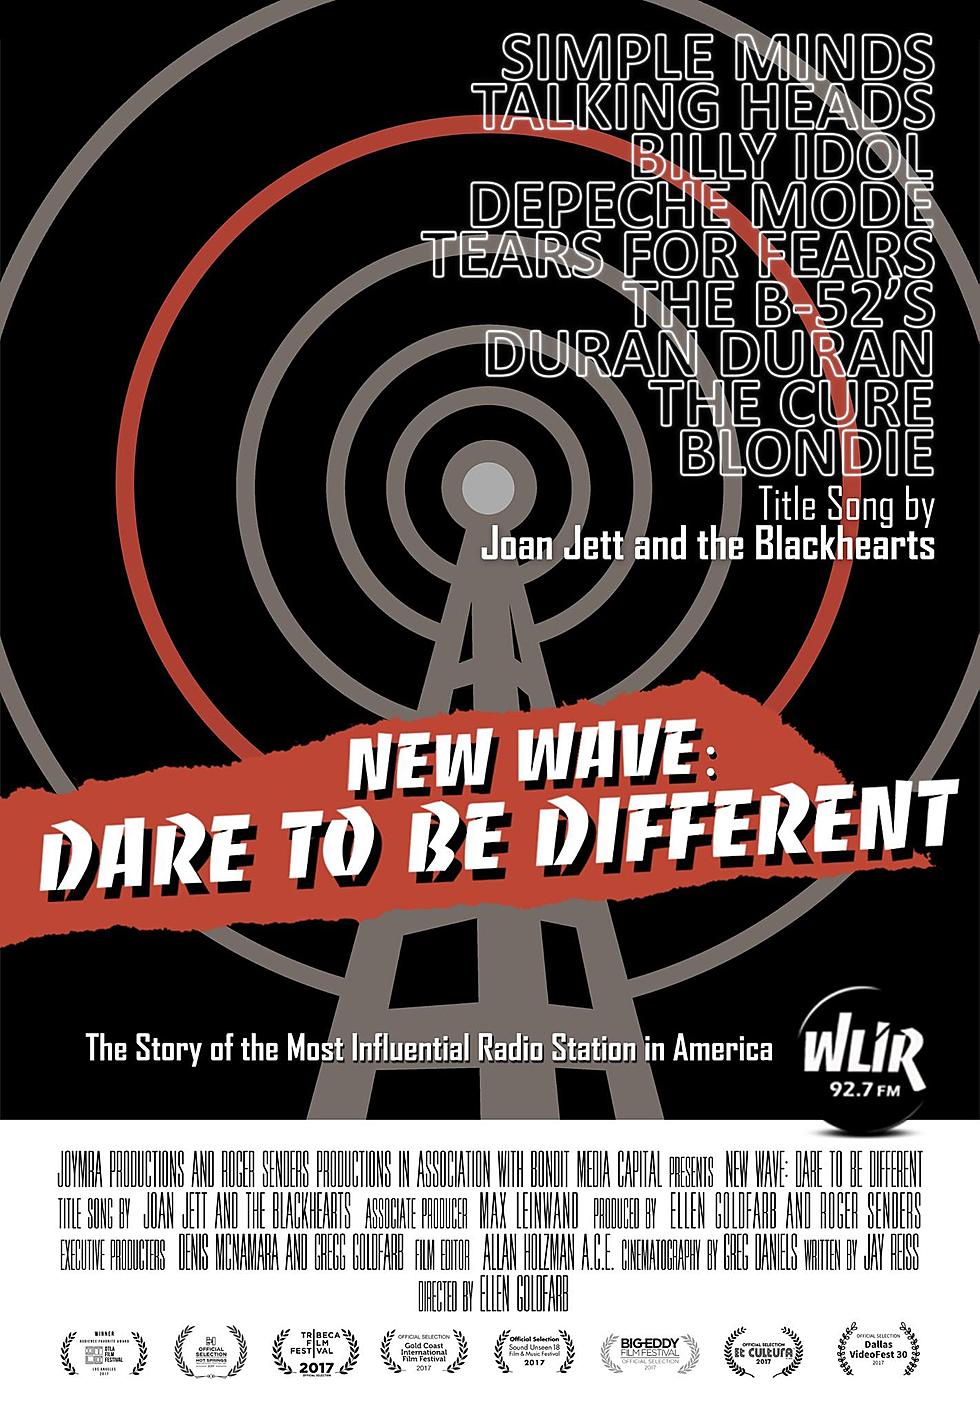 WLIR documentary 'New Wave: Dare to be Different' coming to Showtime (watch  the trailer)